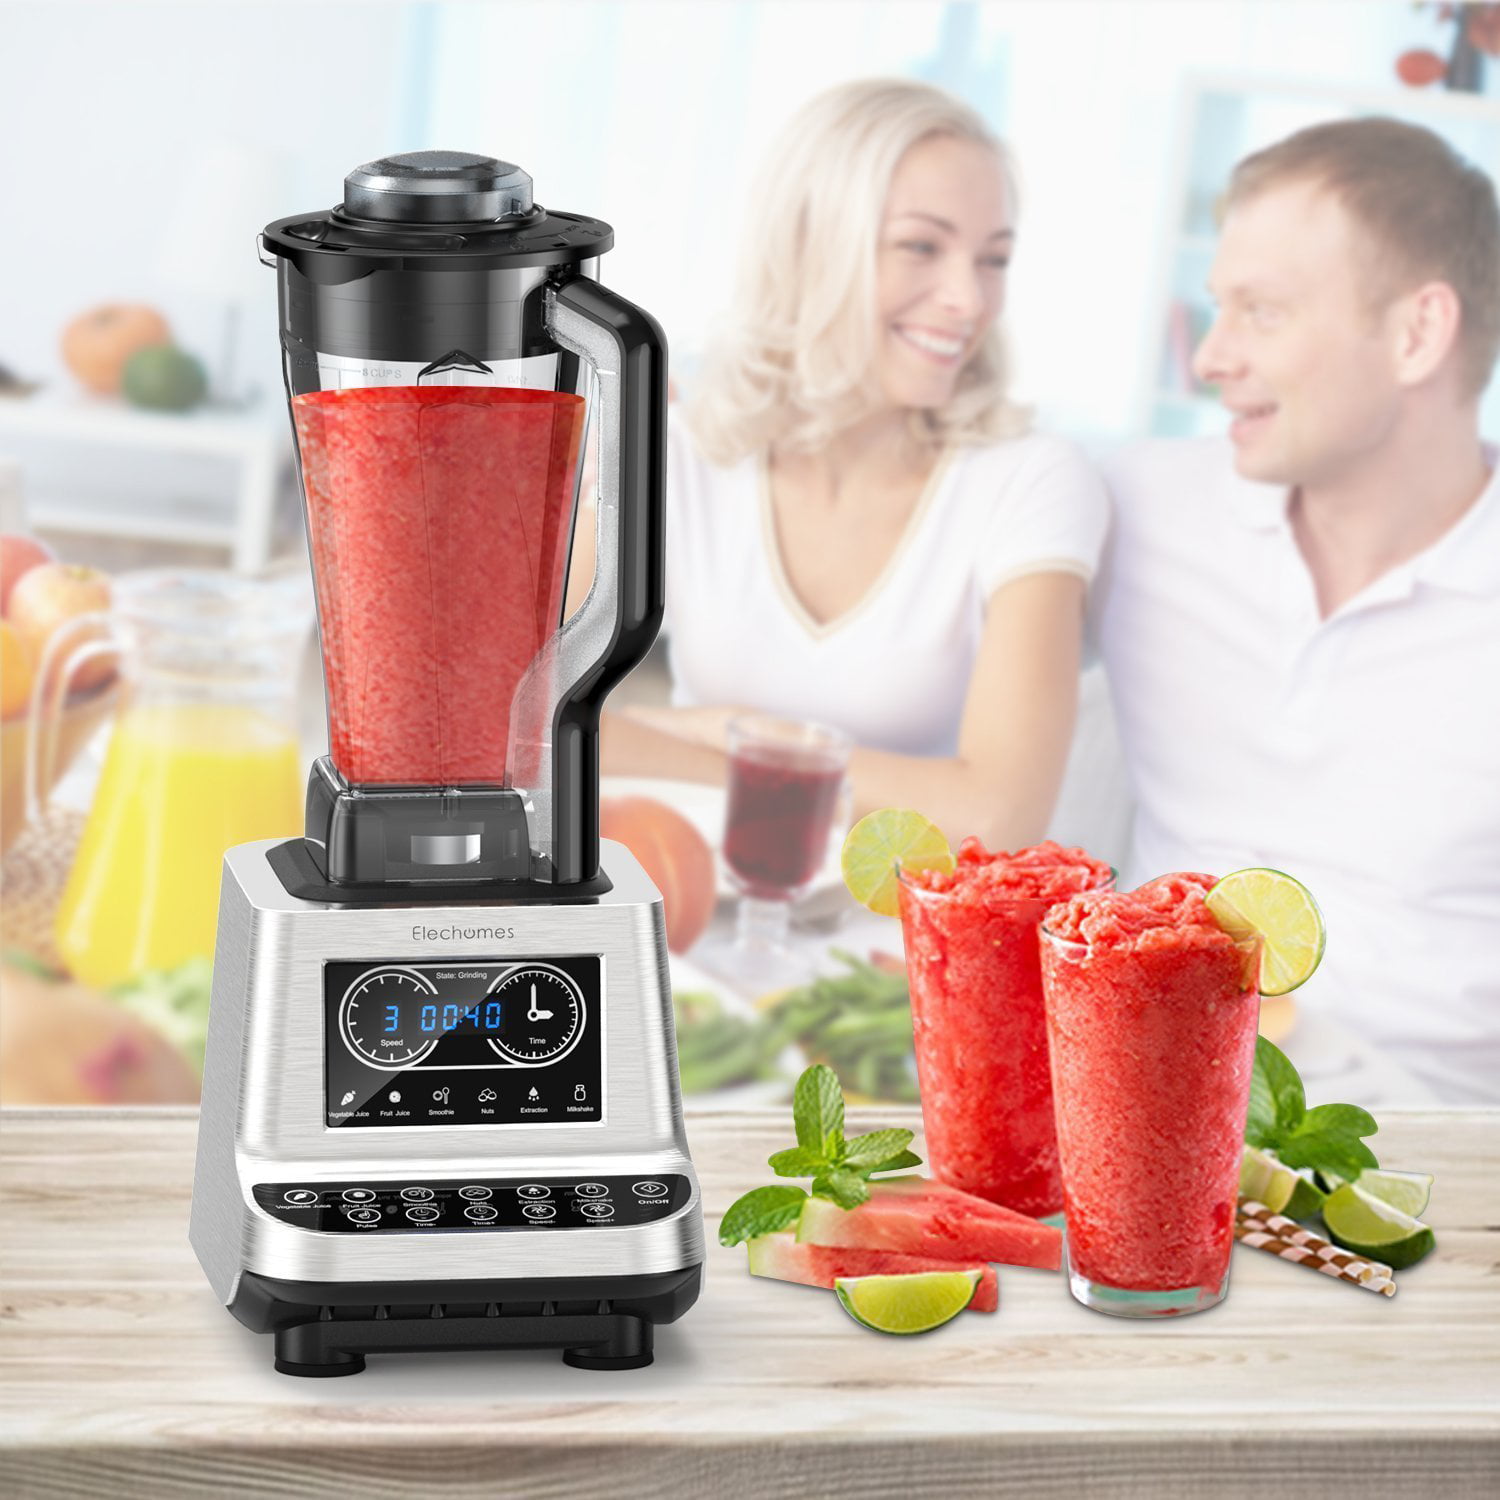 10 Speed Heavy-Duty Commercial Blender Equipped PC Jar Sauce Juicer Smoothies Food Processor for Restaurants Coffee Shop 3 Time Set 35000 RPM 2HP 110